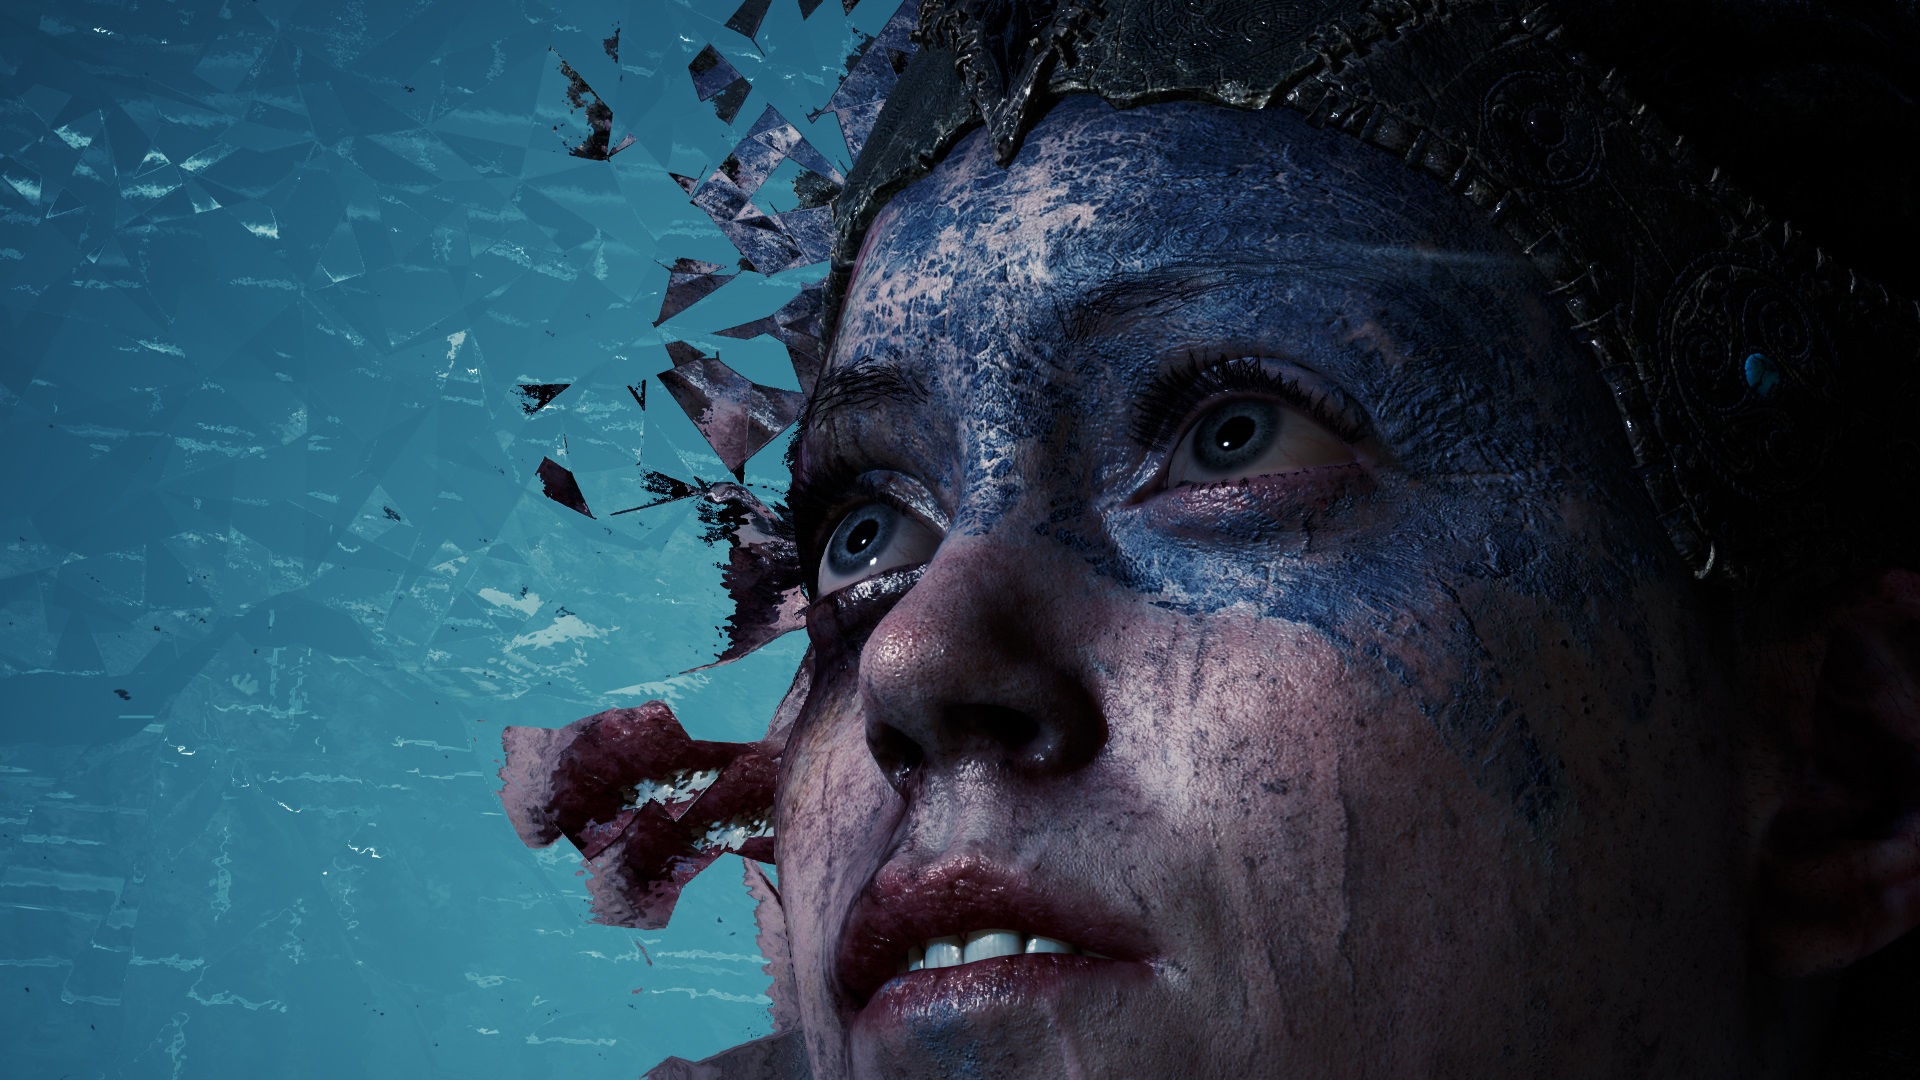 Hellblade: Senua’s Sacrifice Sells Over 500,000 Copies in 3 Months